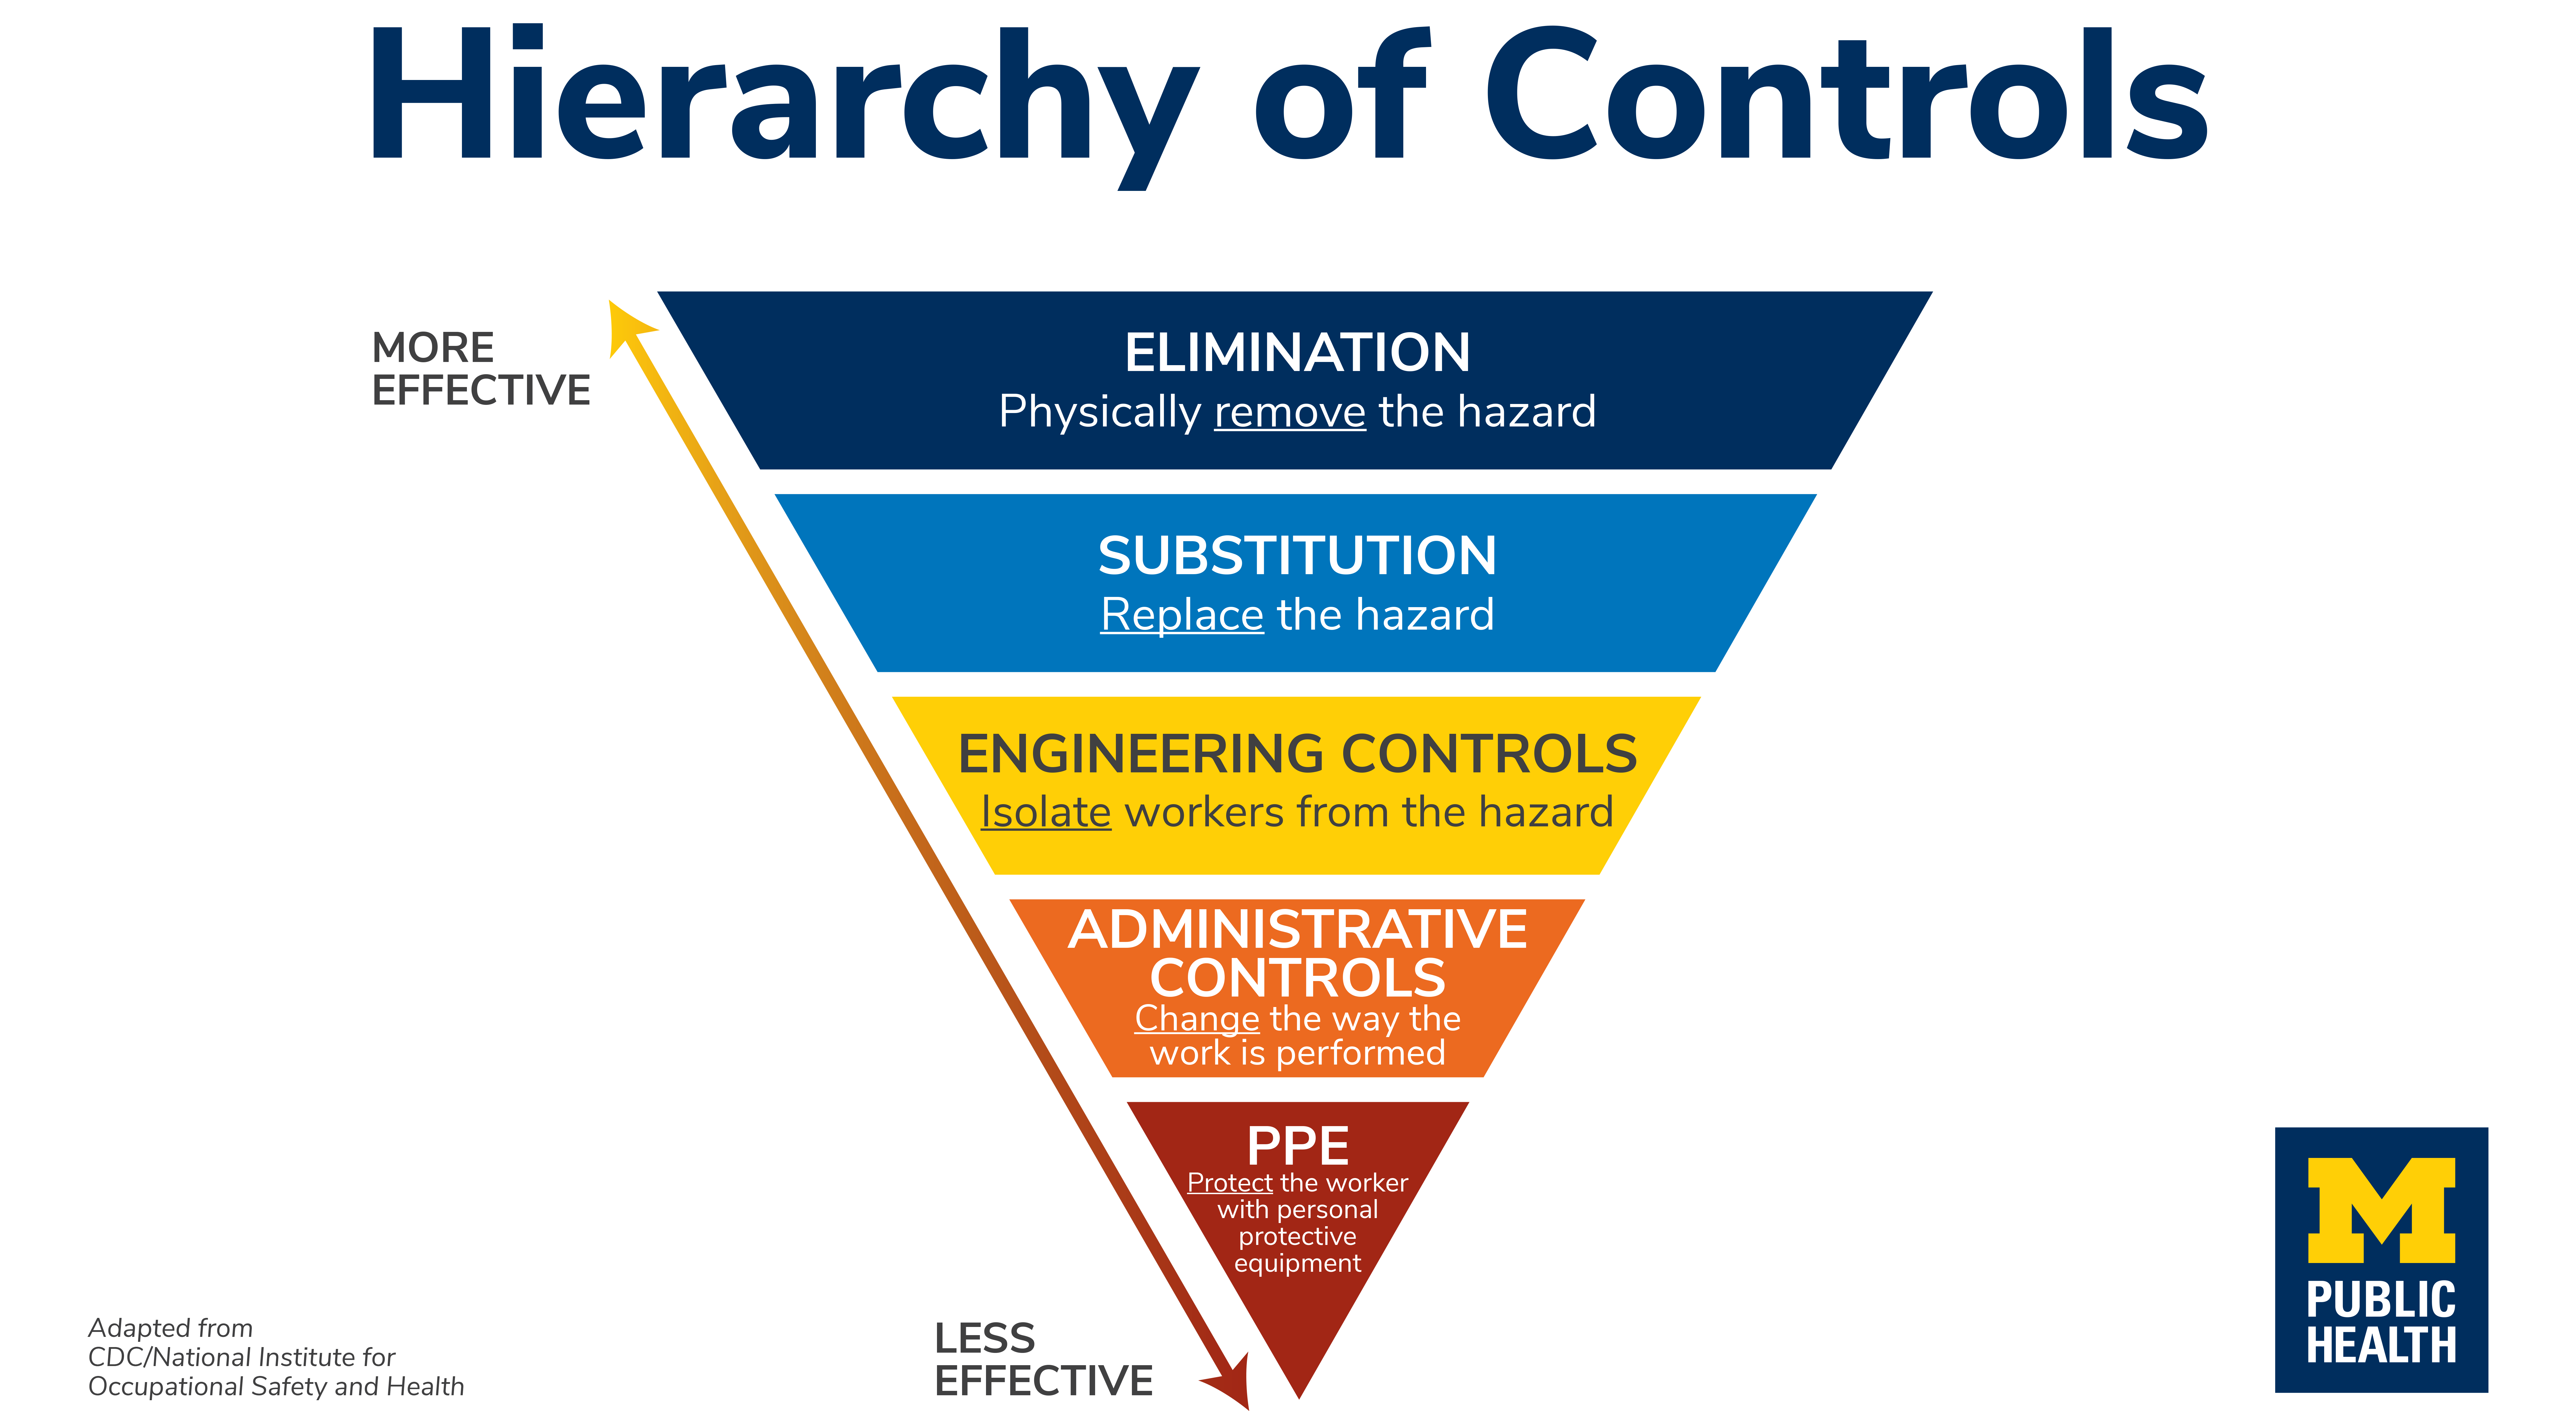 Illustration of the hierarchy of controls for COVID-19